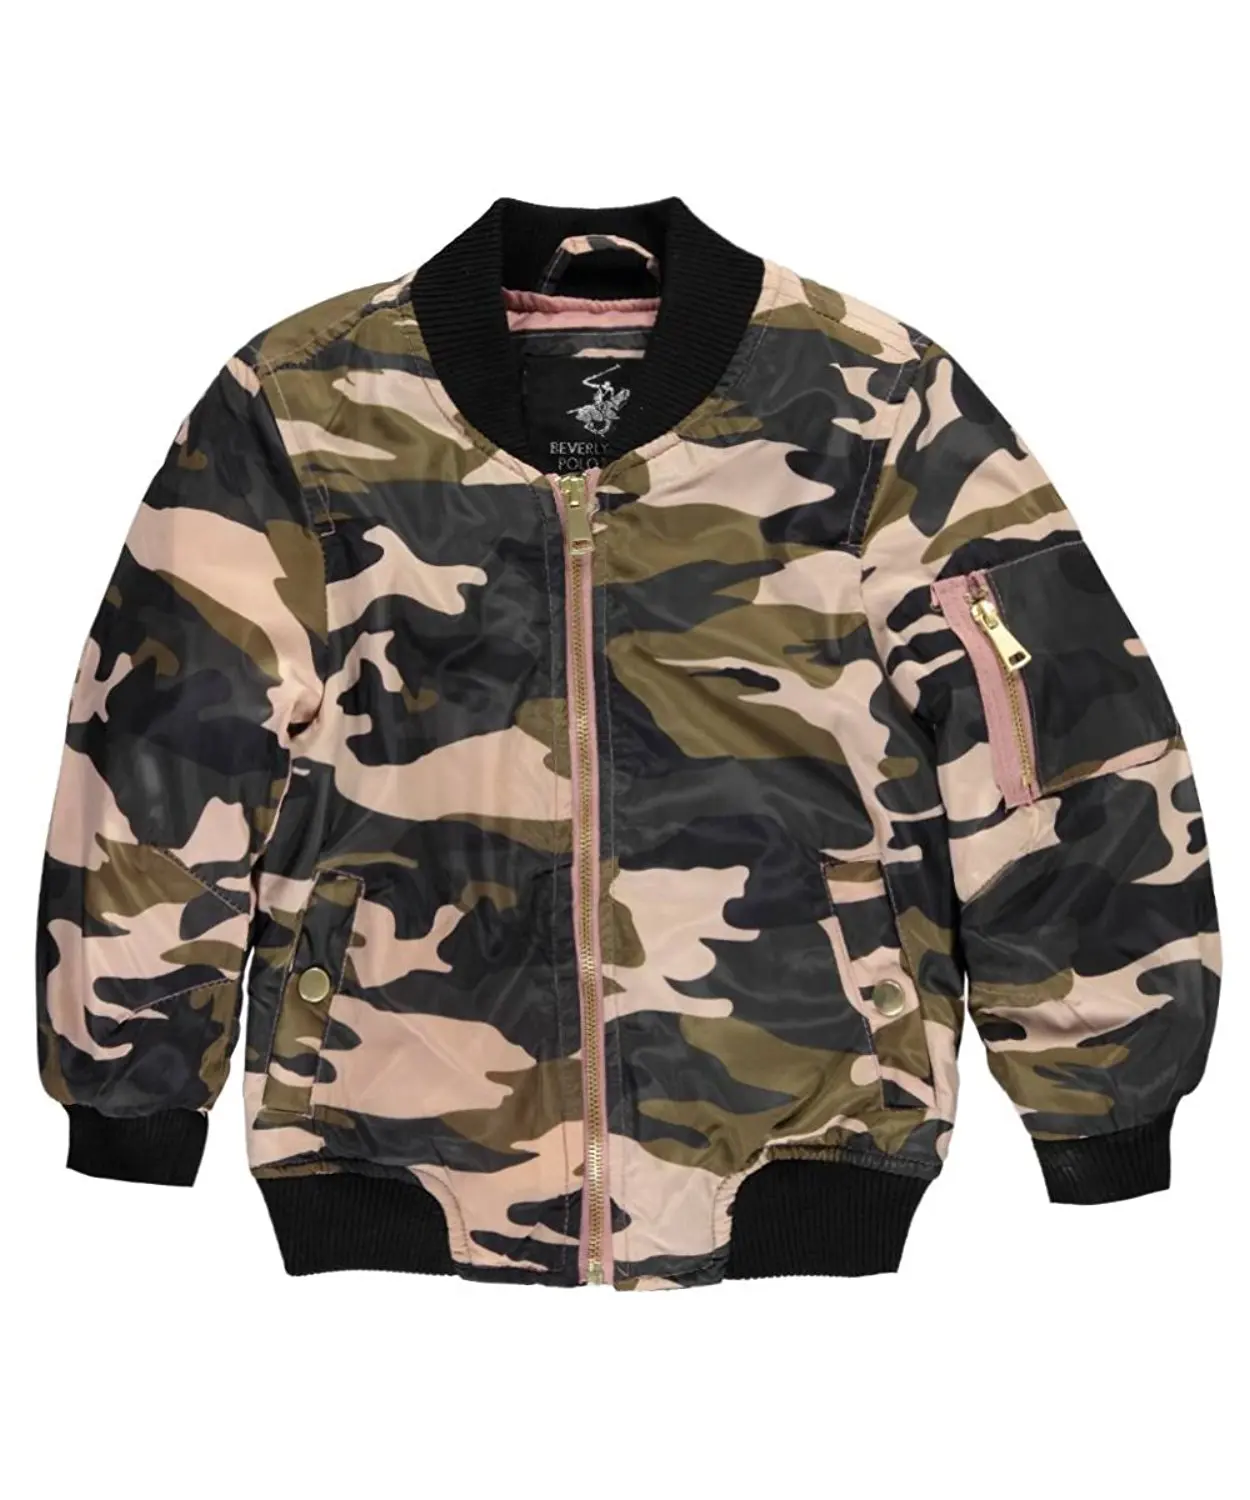 Cheap Camo Jacket Girls, find Camo Jacket Girls deals on line at ...